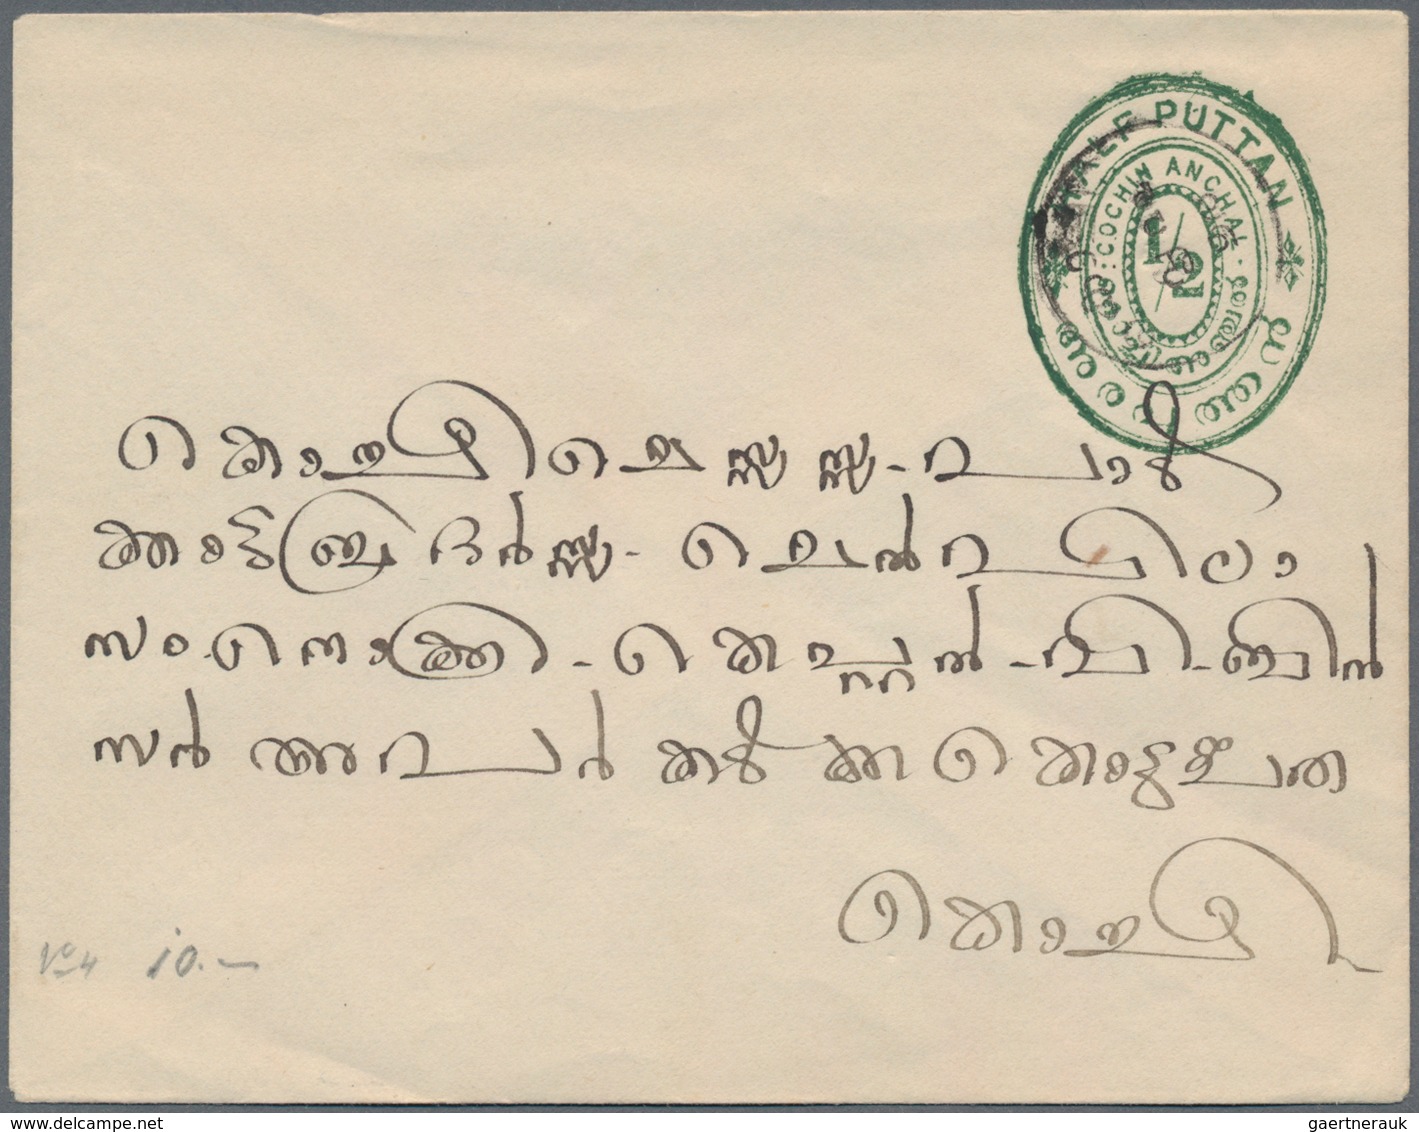 Indien - Feudalstaaten - Cochin: COCHIN 1892-1940's: Collection of 49 postal stationery cards (31) a